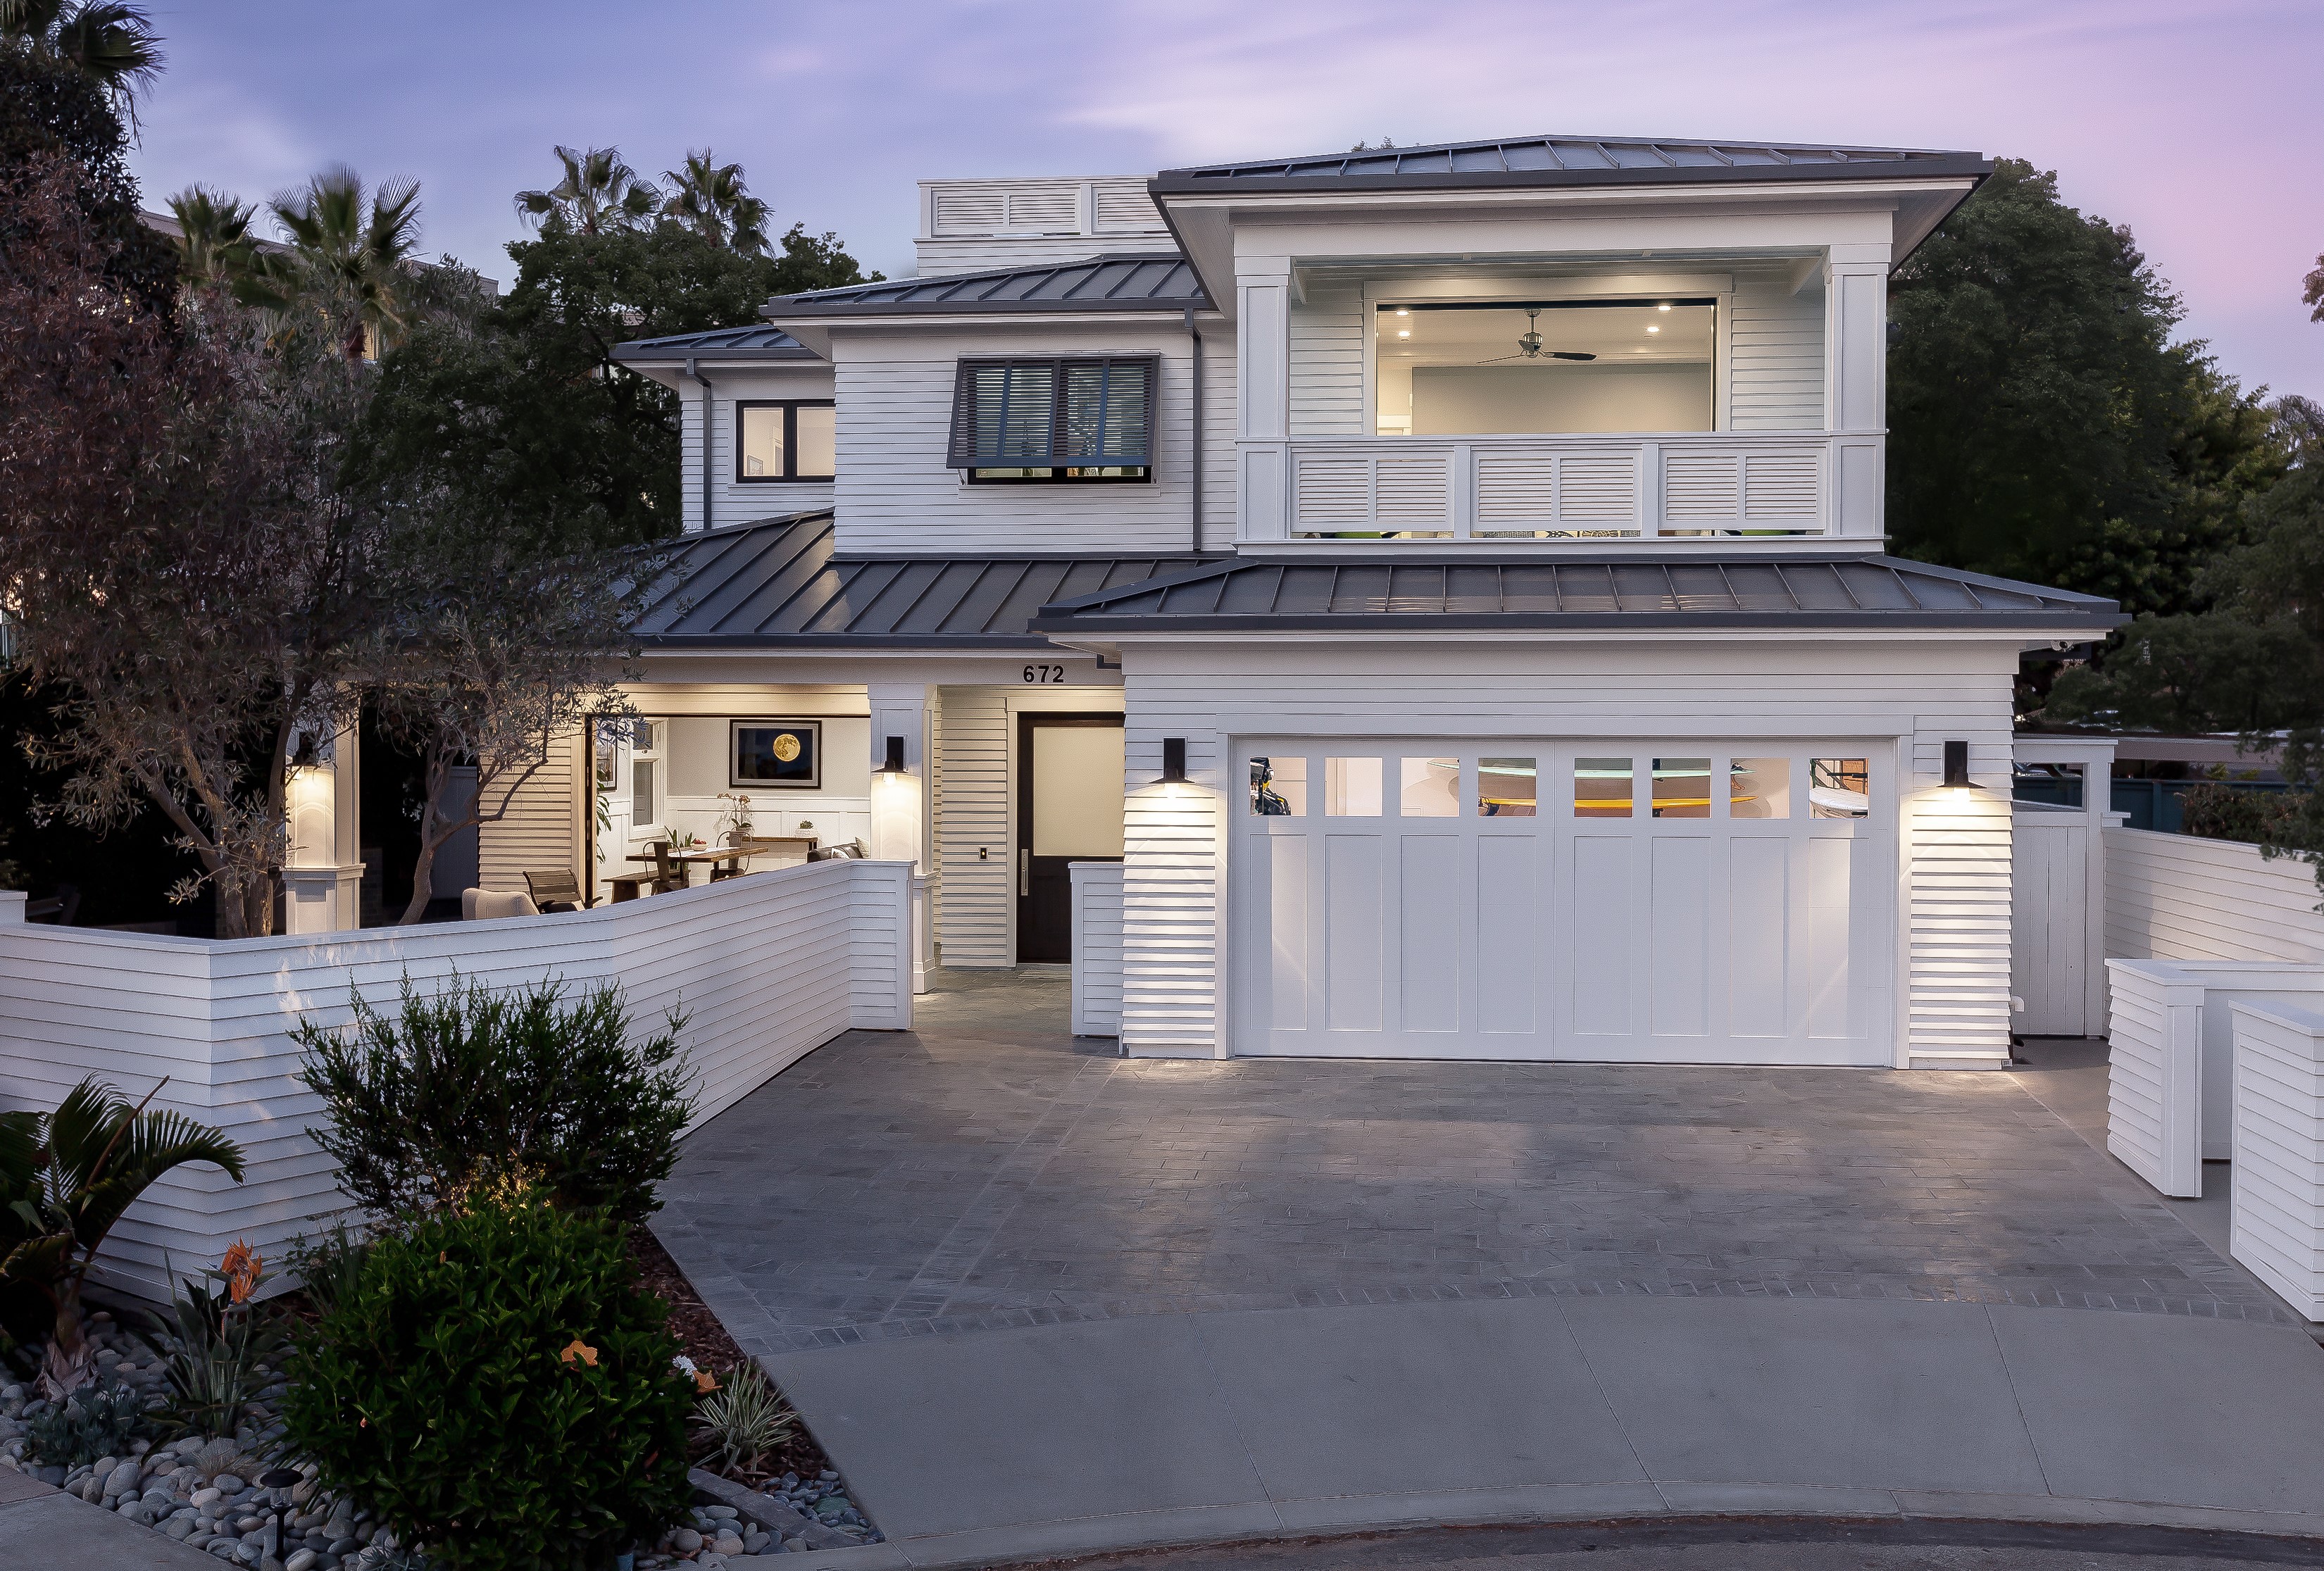 Garage Door Styles: Classic and Contemporary